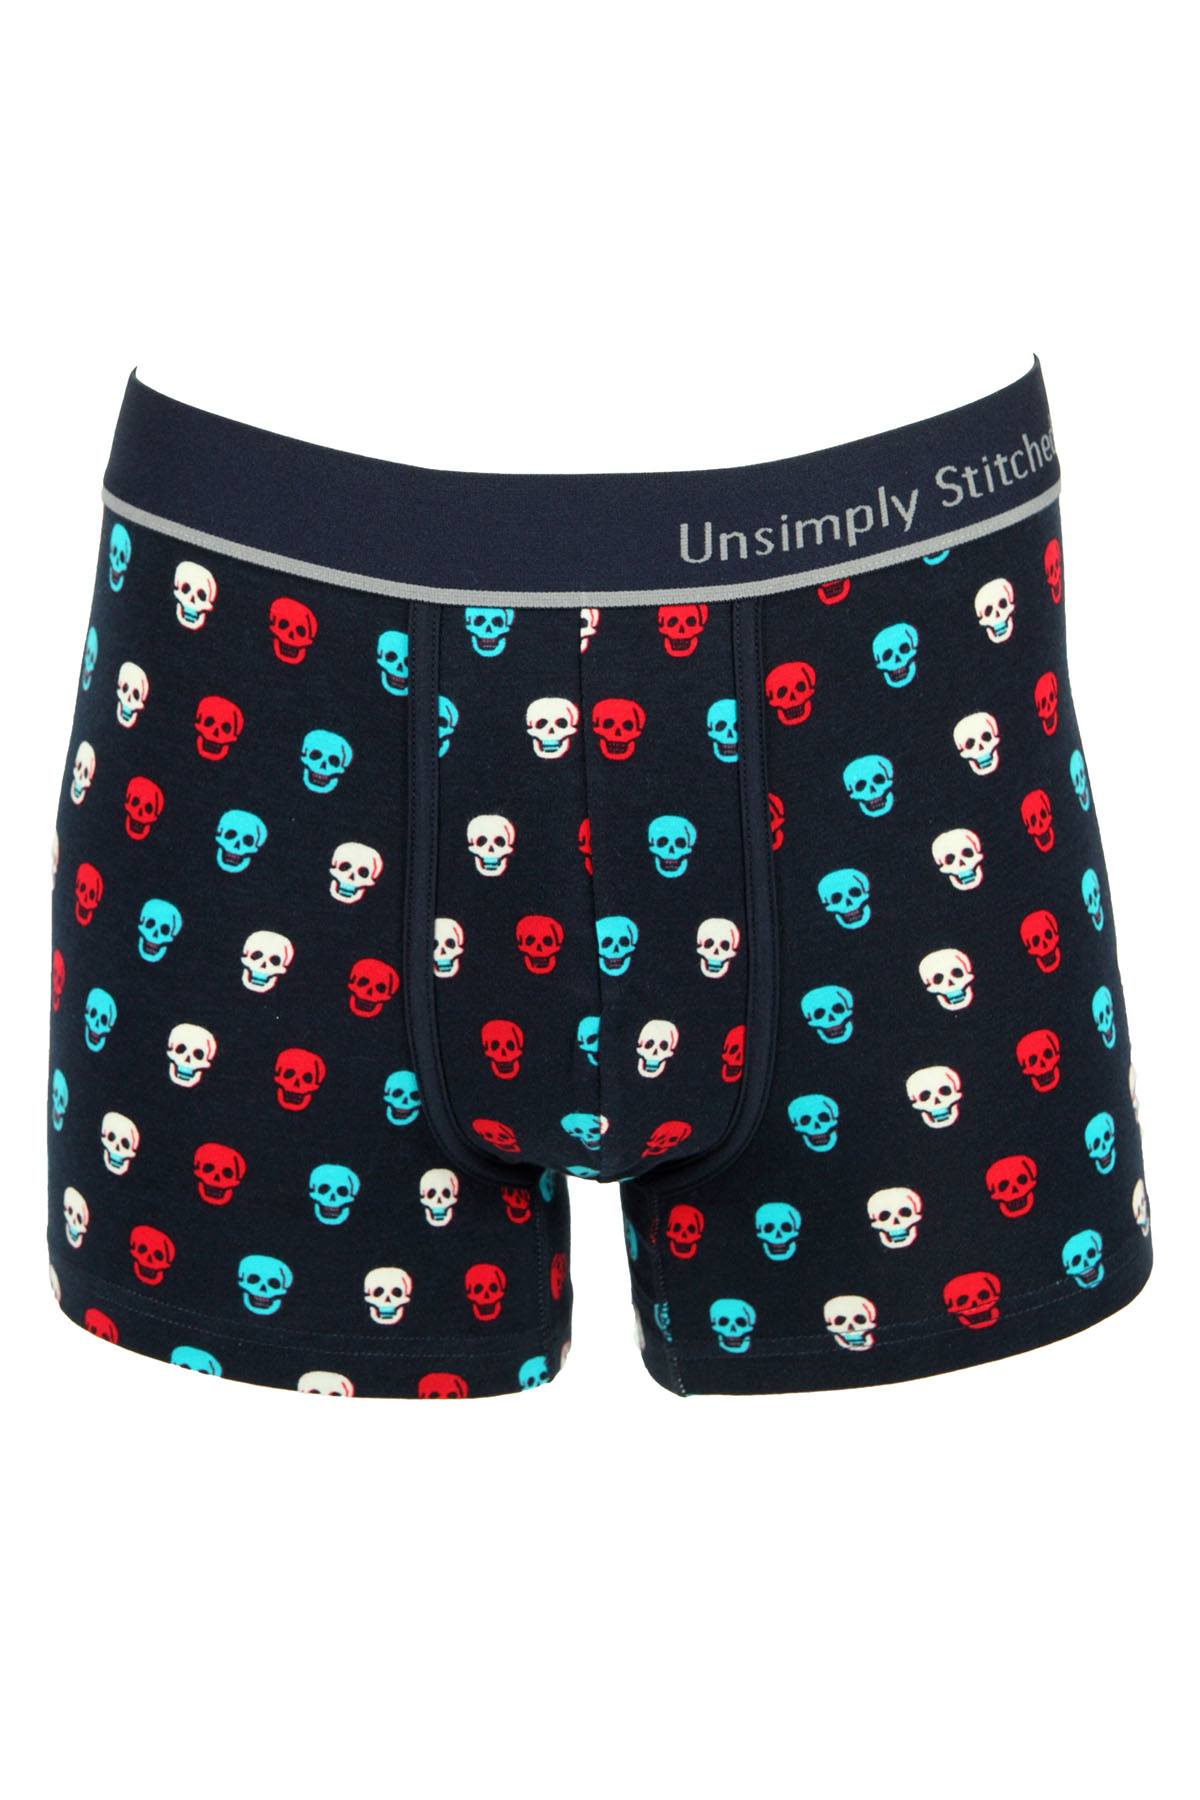 Unsimply Stitched Navy Skull Trunk